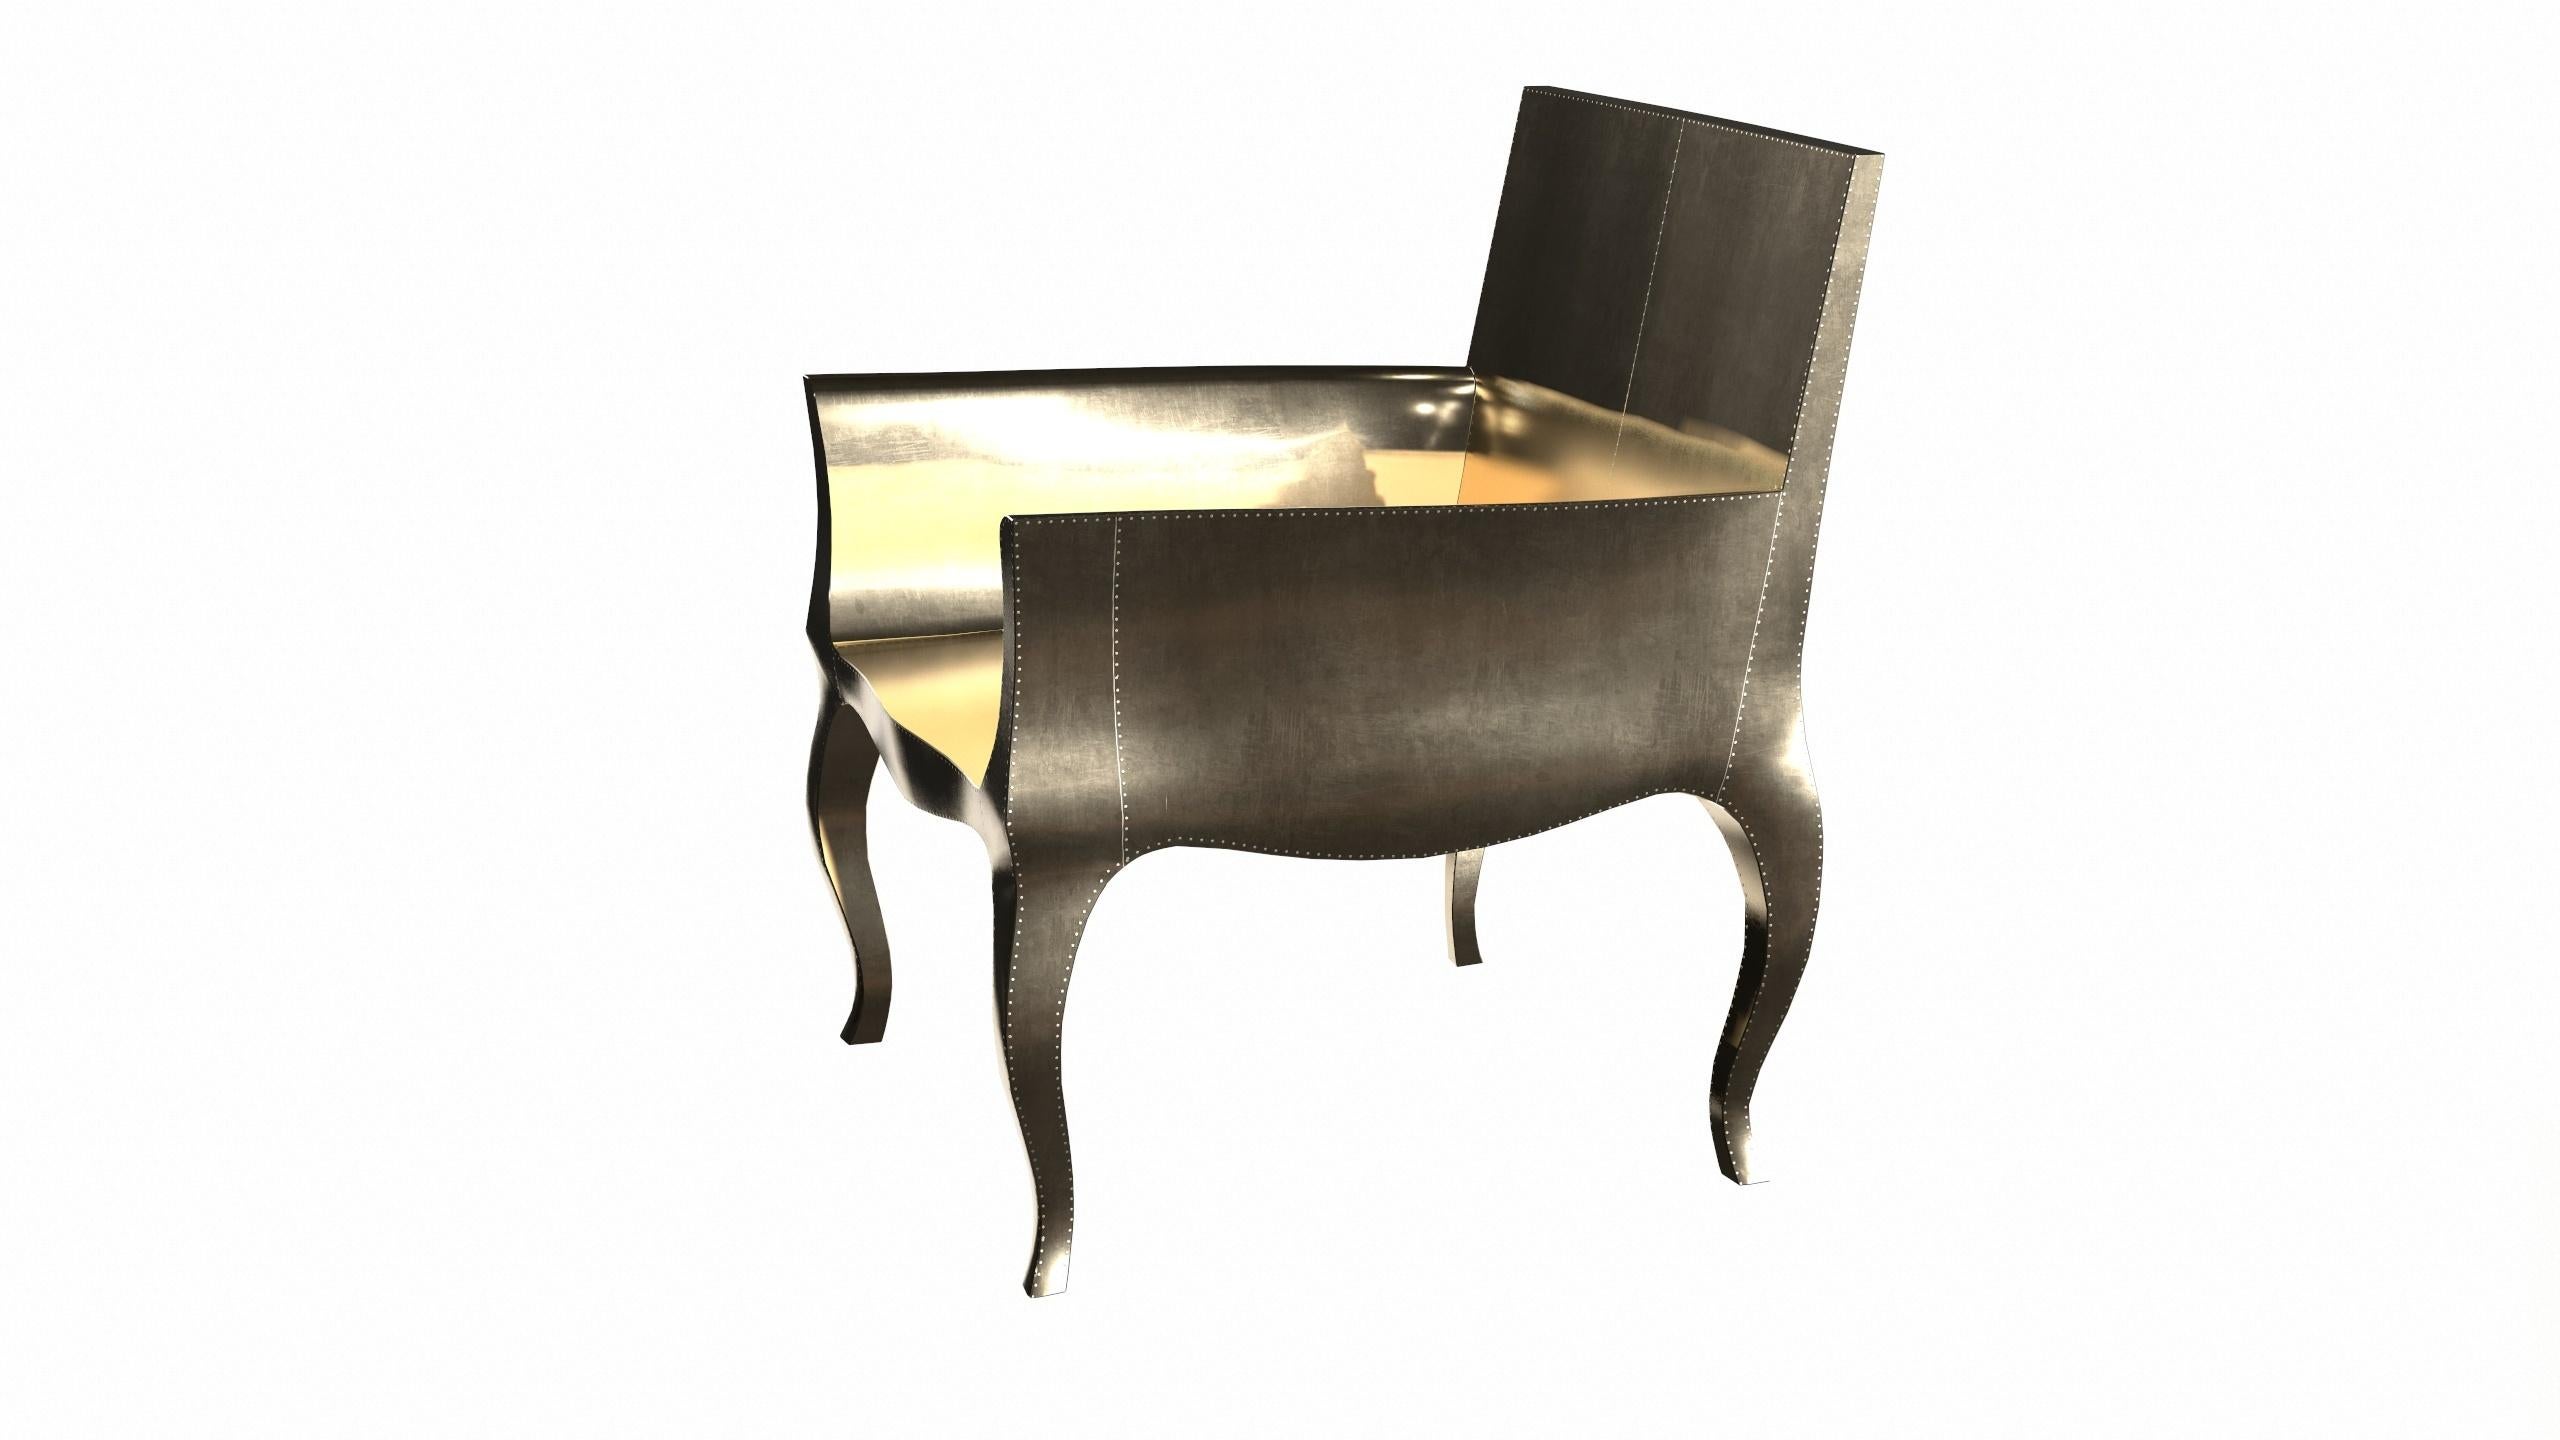 Hand-Carved Art Deco Lounge Chair in Smooth Brass by Paul Mathieu for S. Odegard For Sale